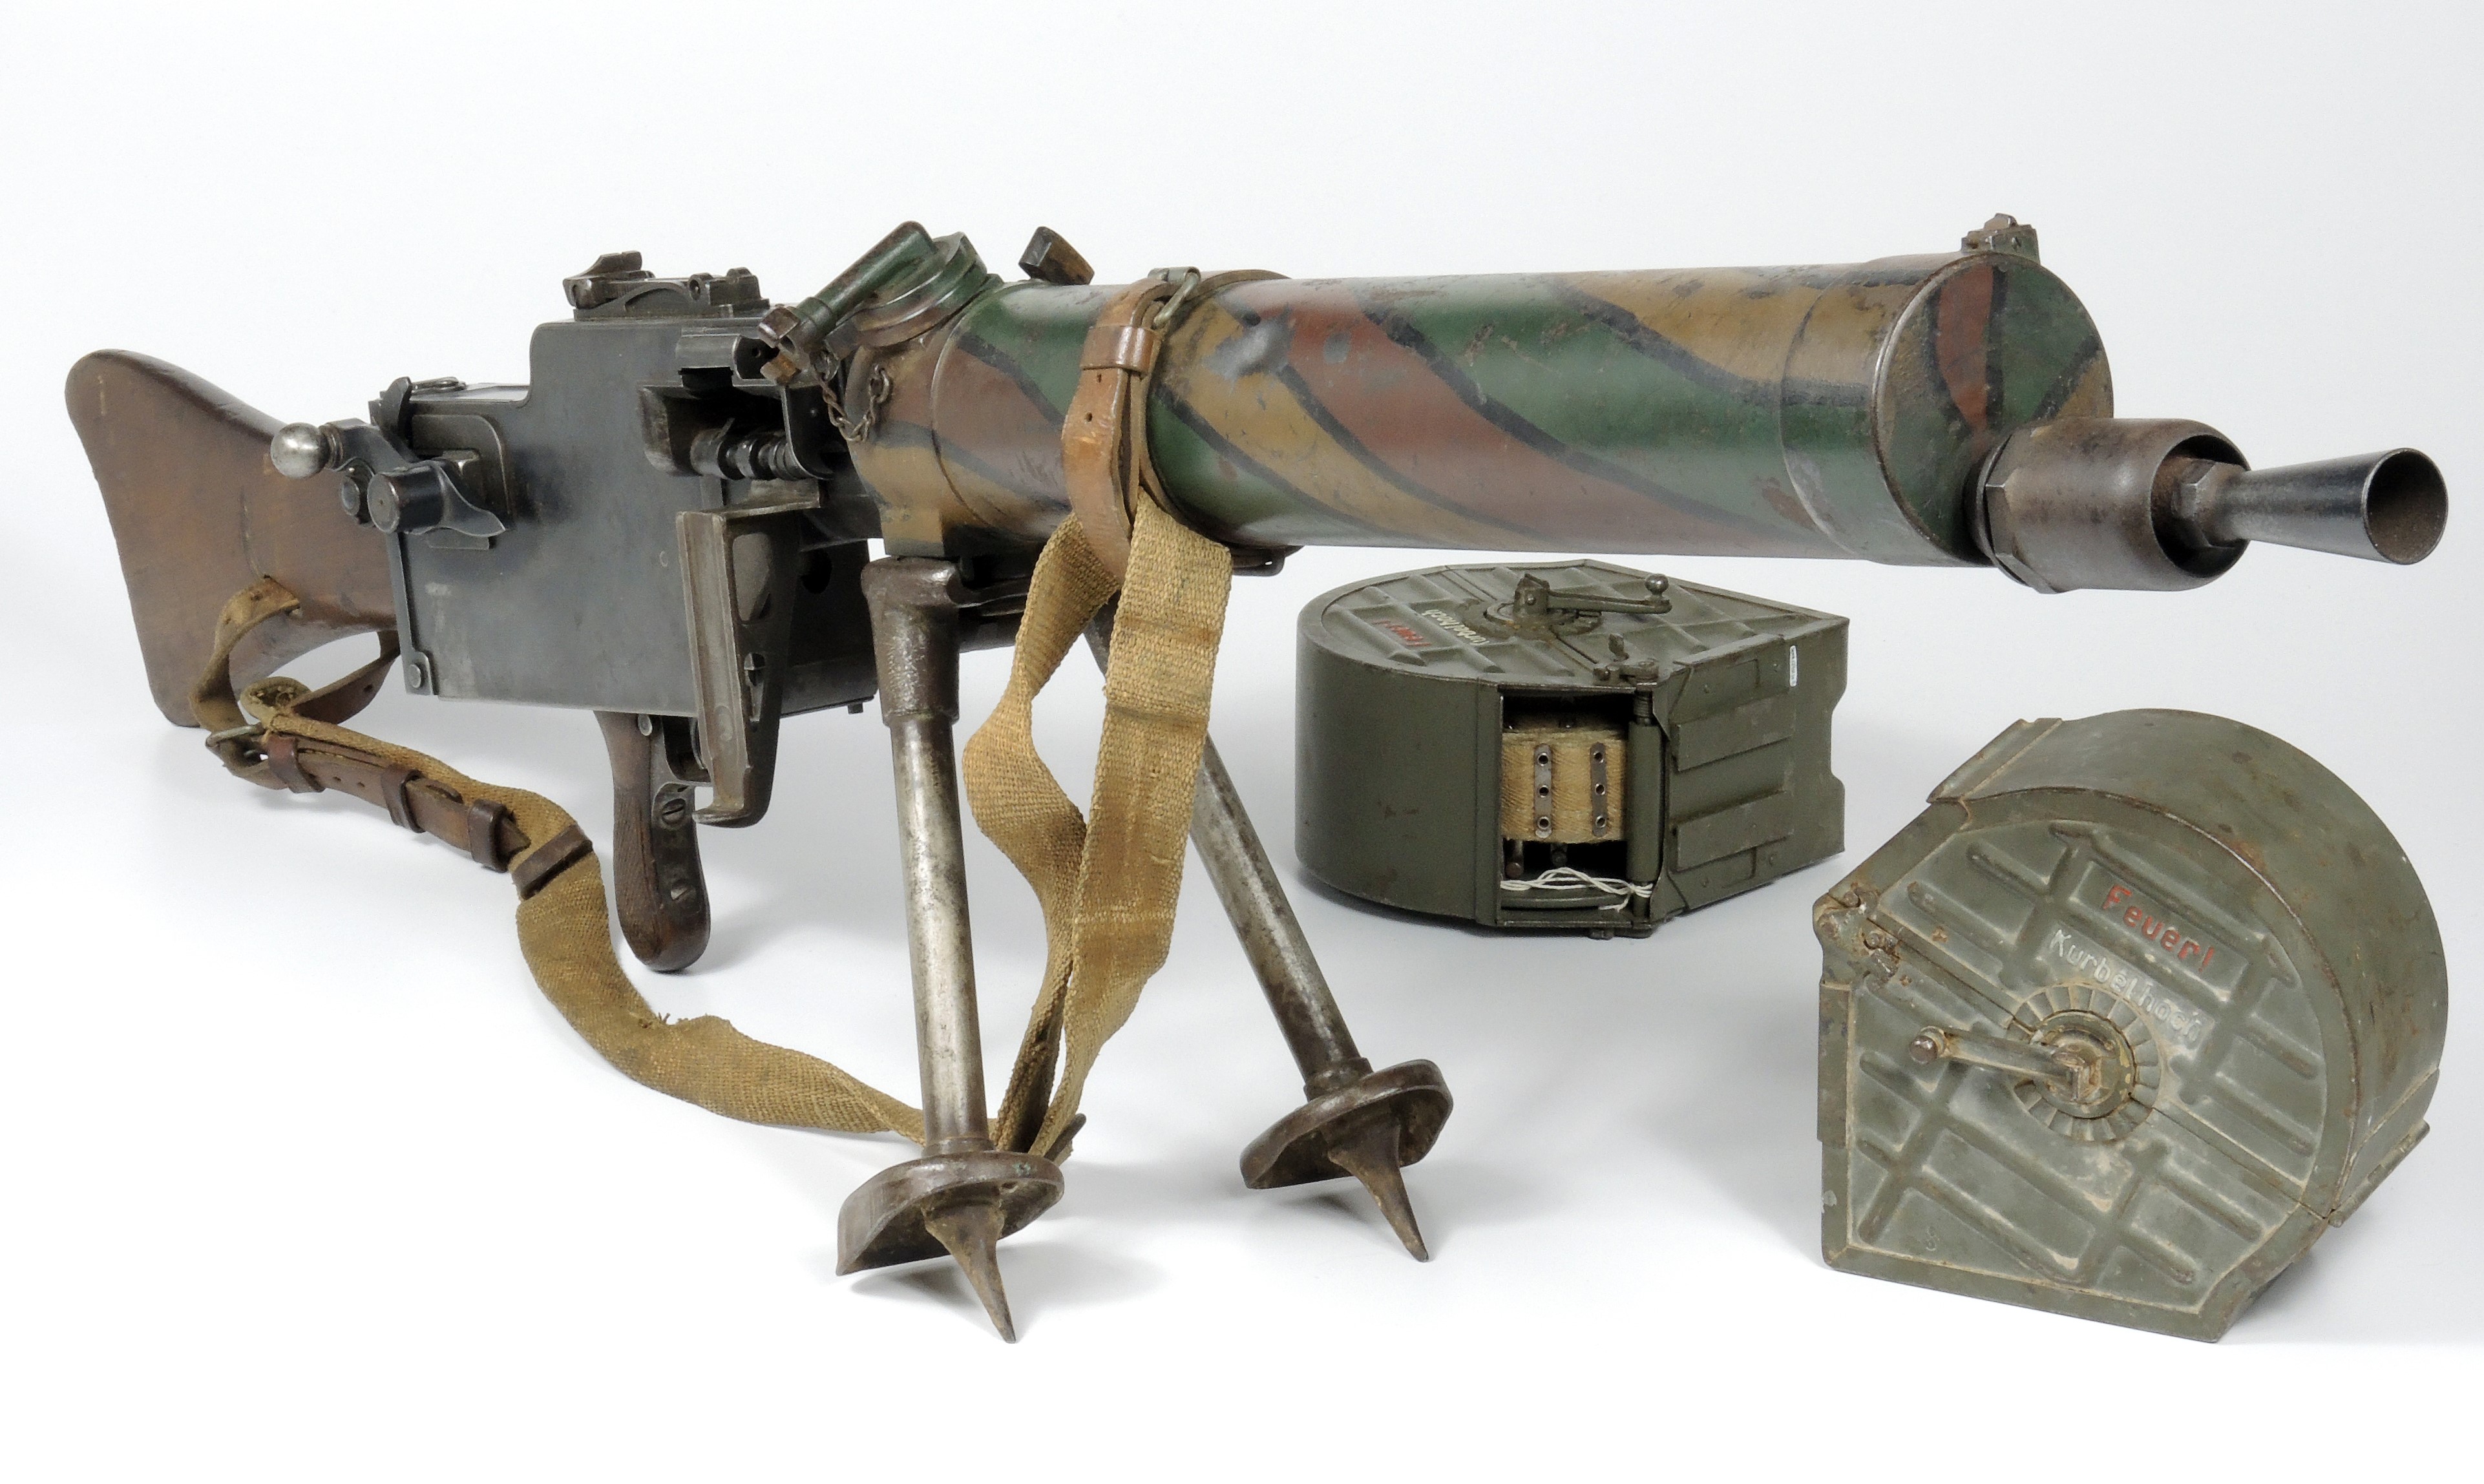 Photo of an Imperial German Model 1908/15 Maxim light machine gun and associated components including two round ammunition boxes with independent feed belts, a bi-pod support, an extra main spring, and an extra barrel.